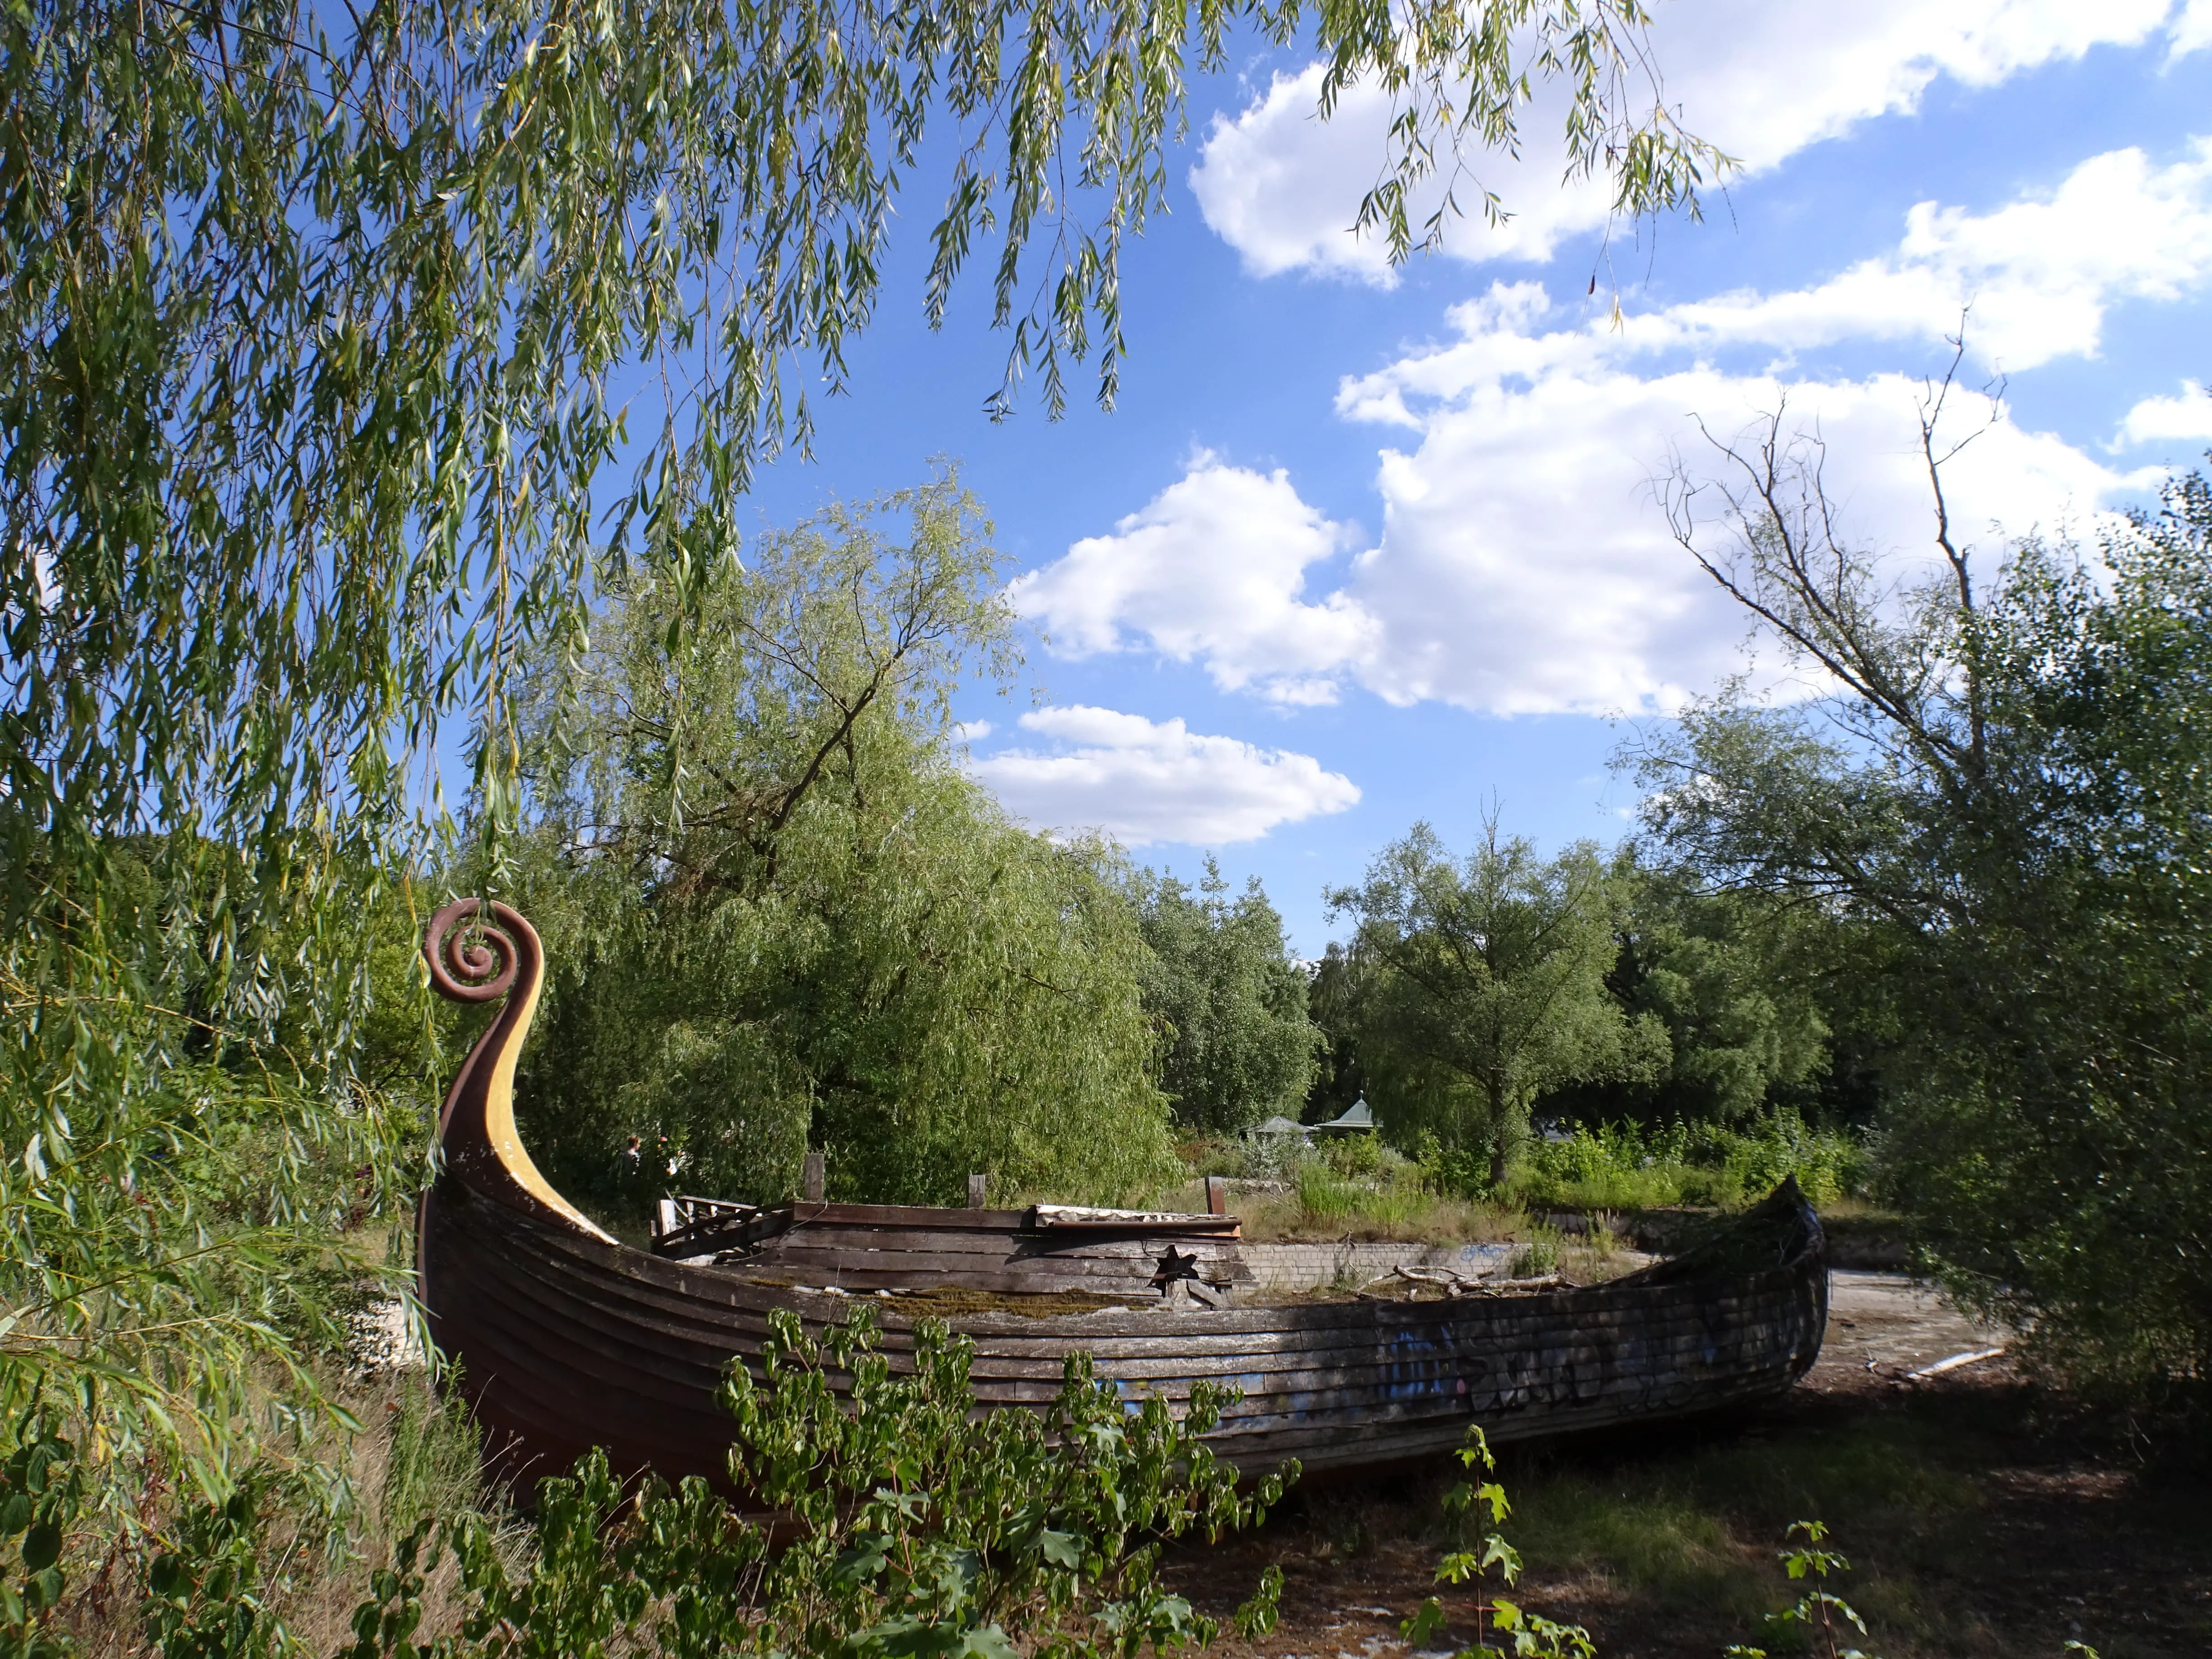 A wooden boat lying in a dry pond